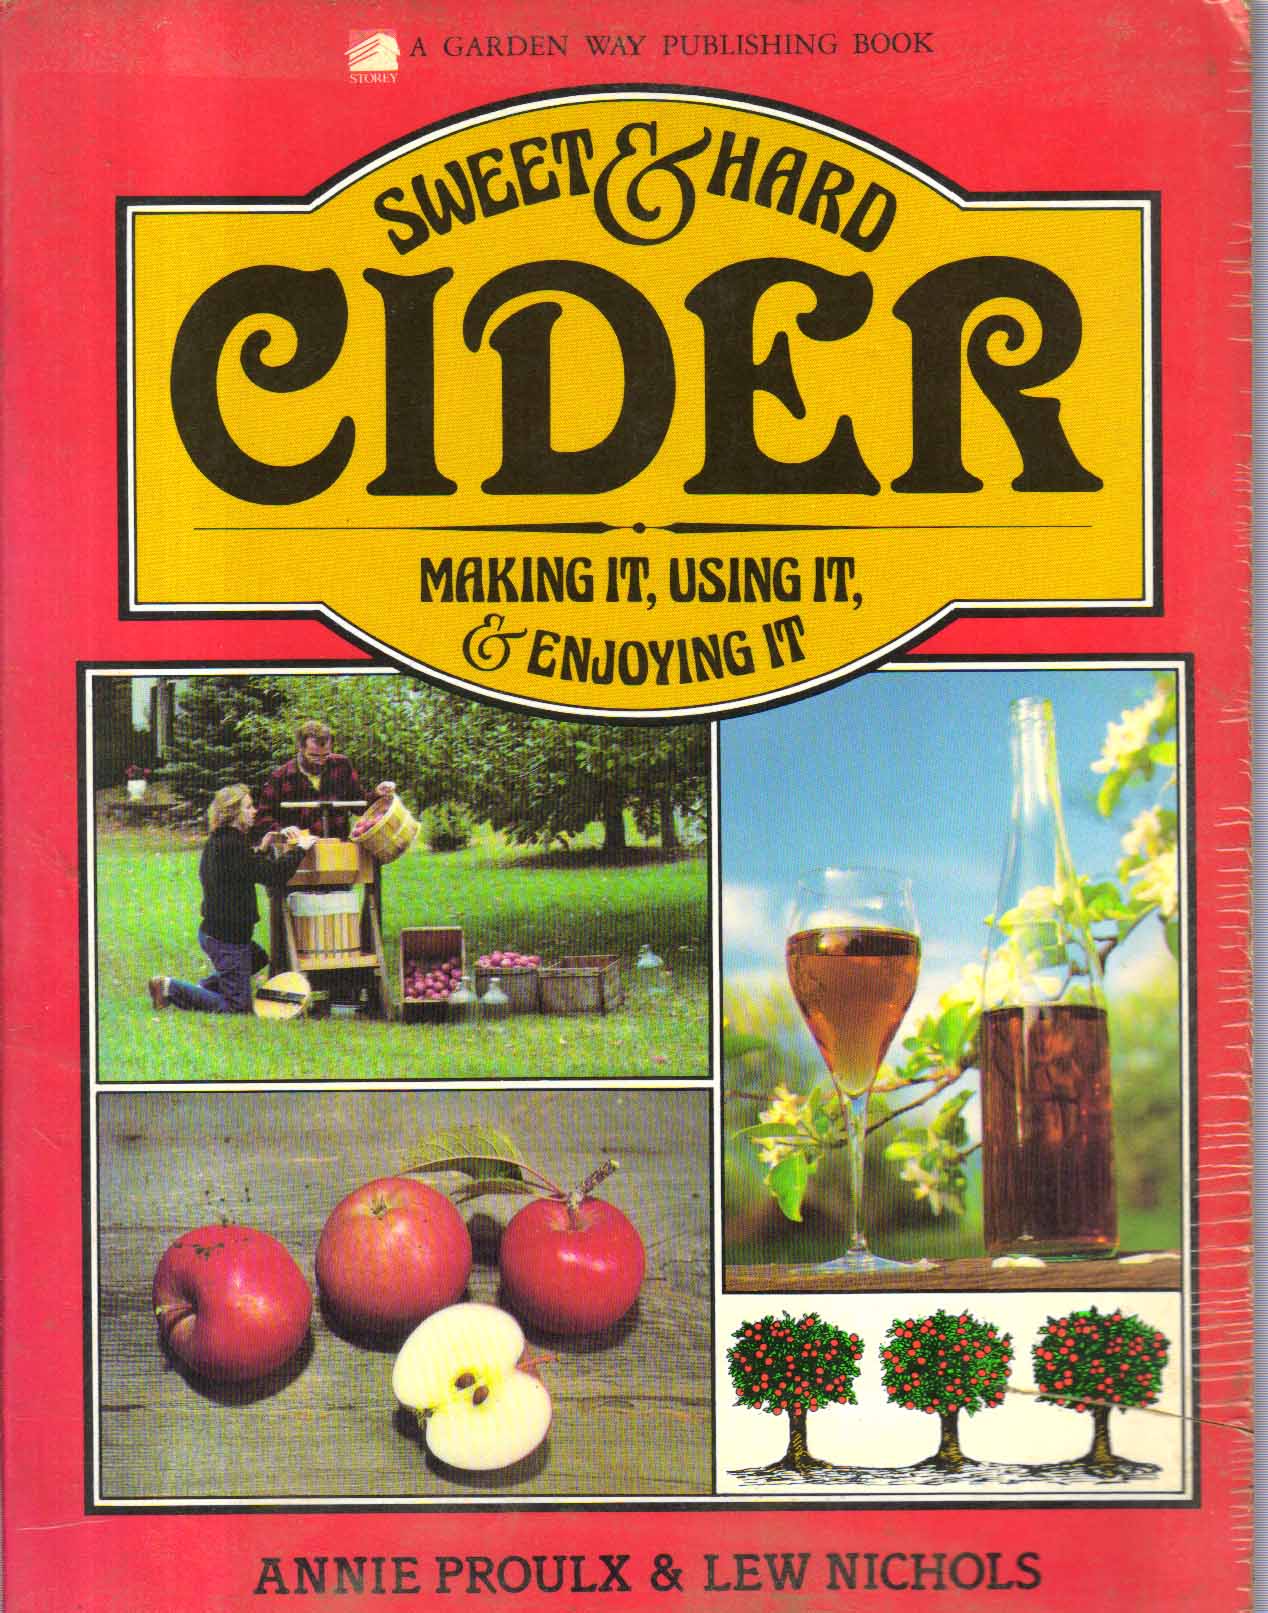 Sweet and Hard Cider